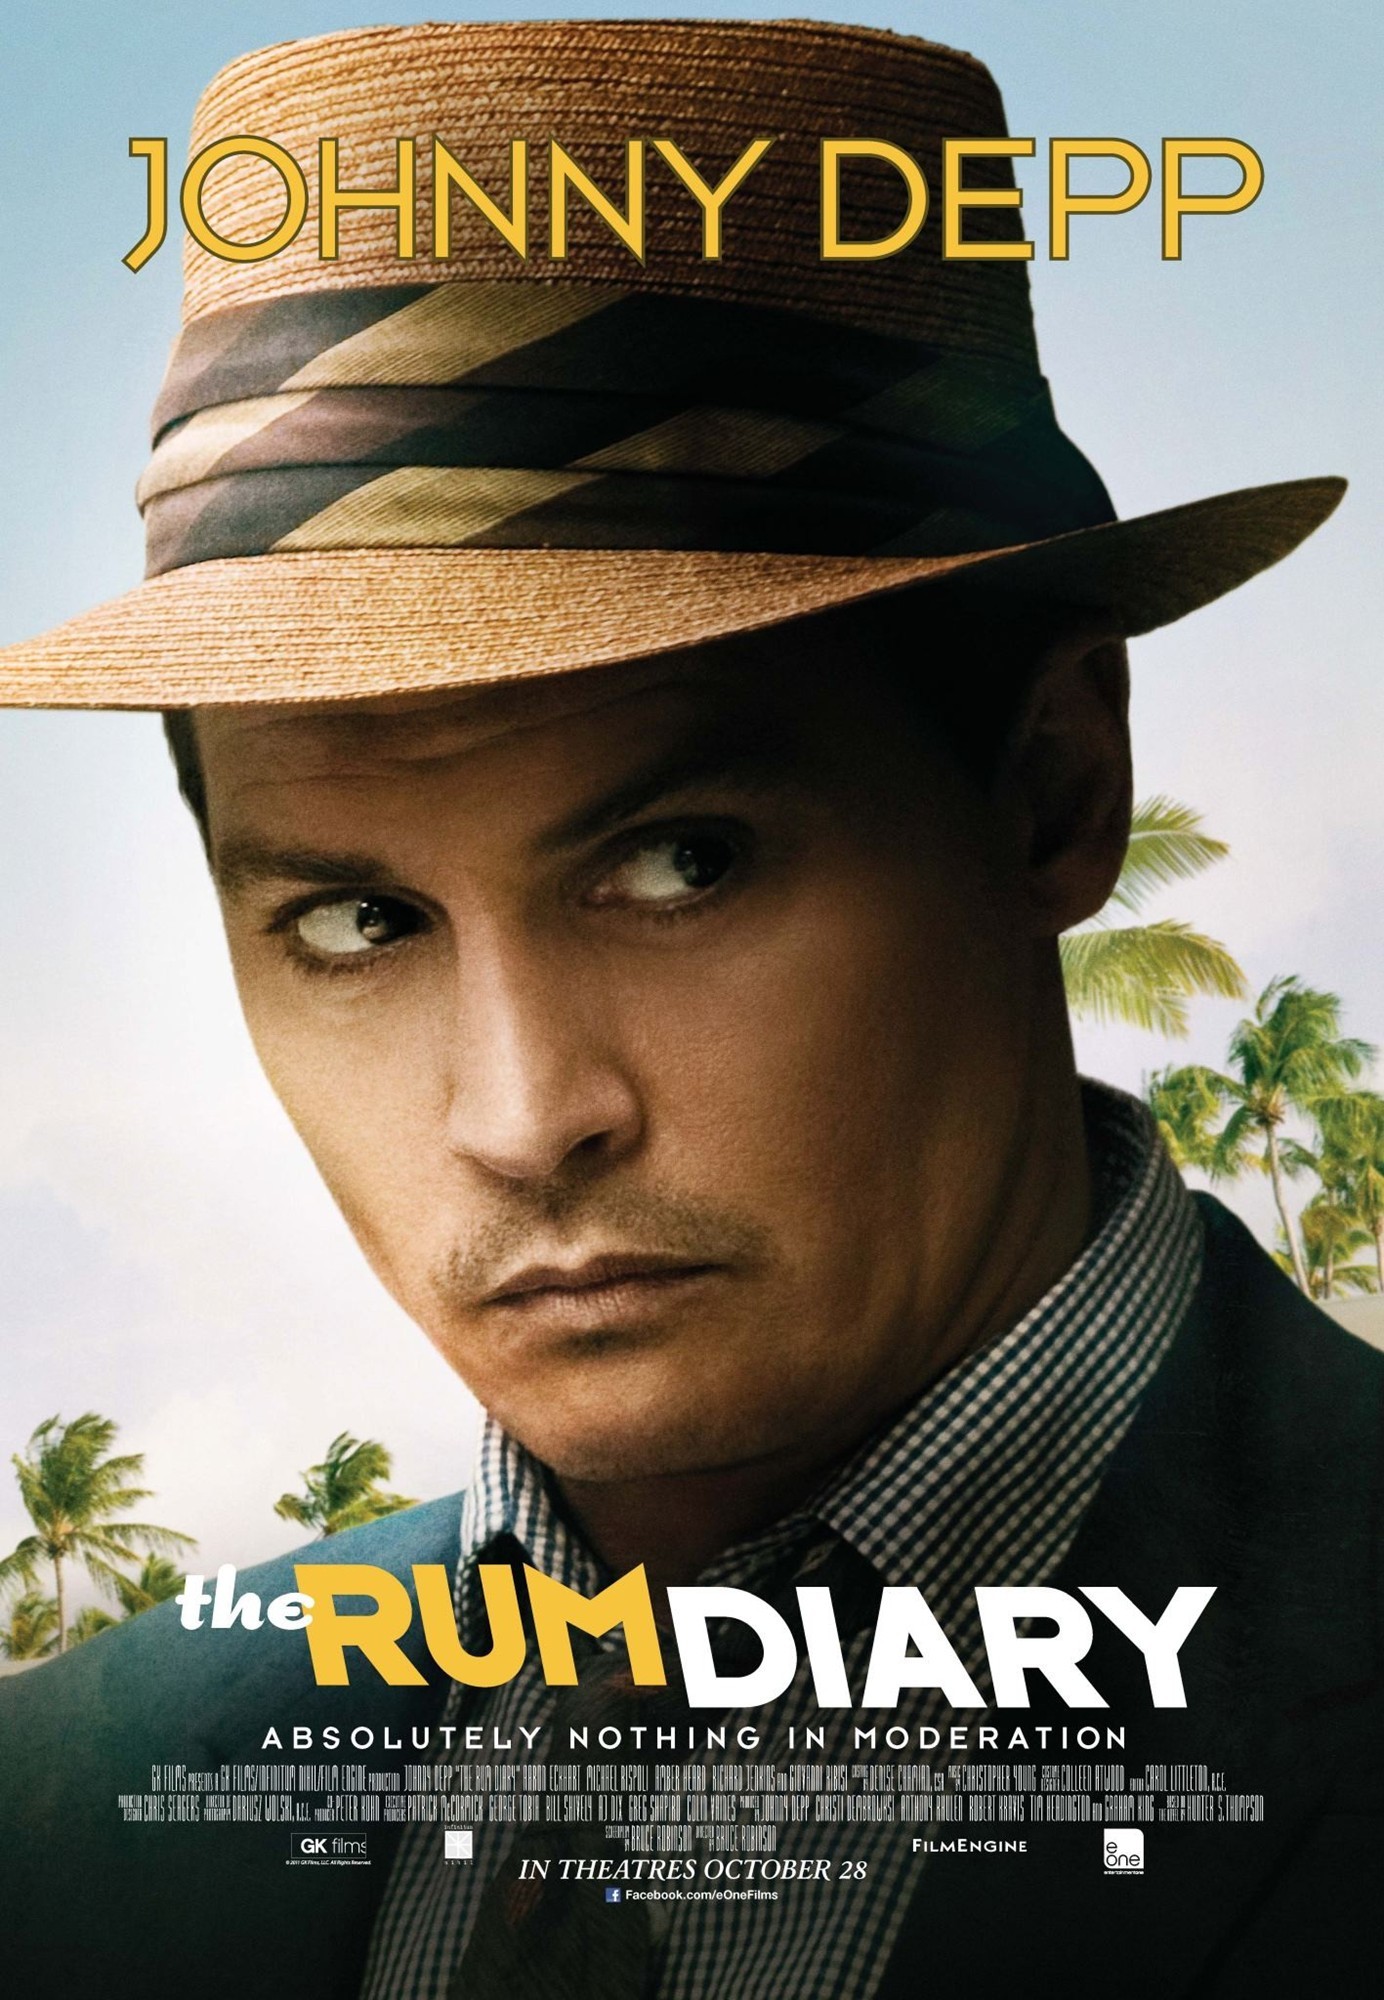 Poster of FilmDistrict's The Rum Diary (2011)